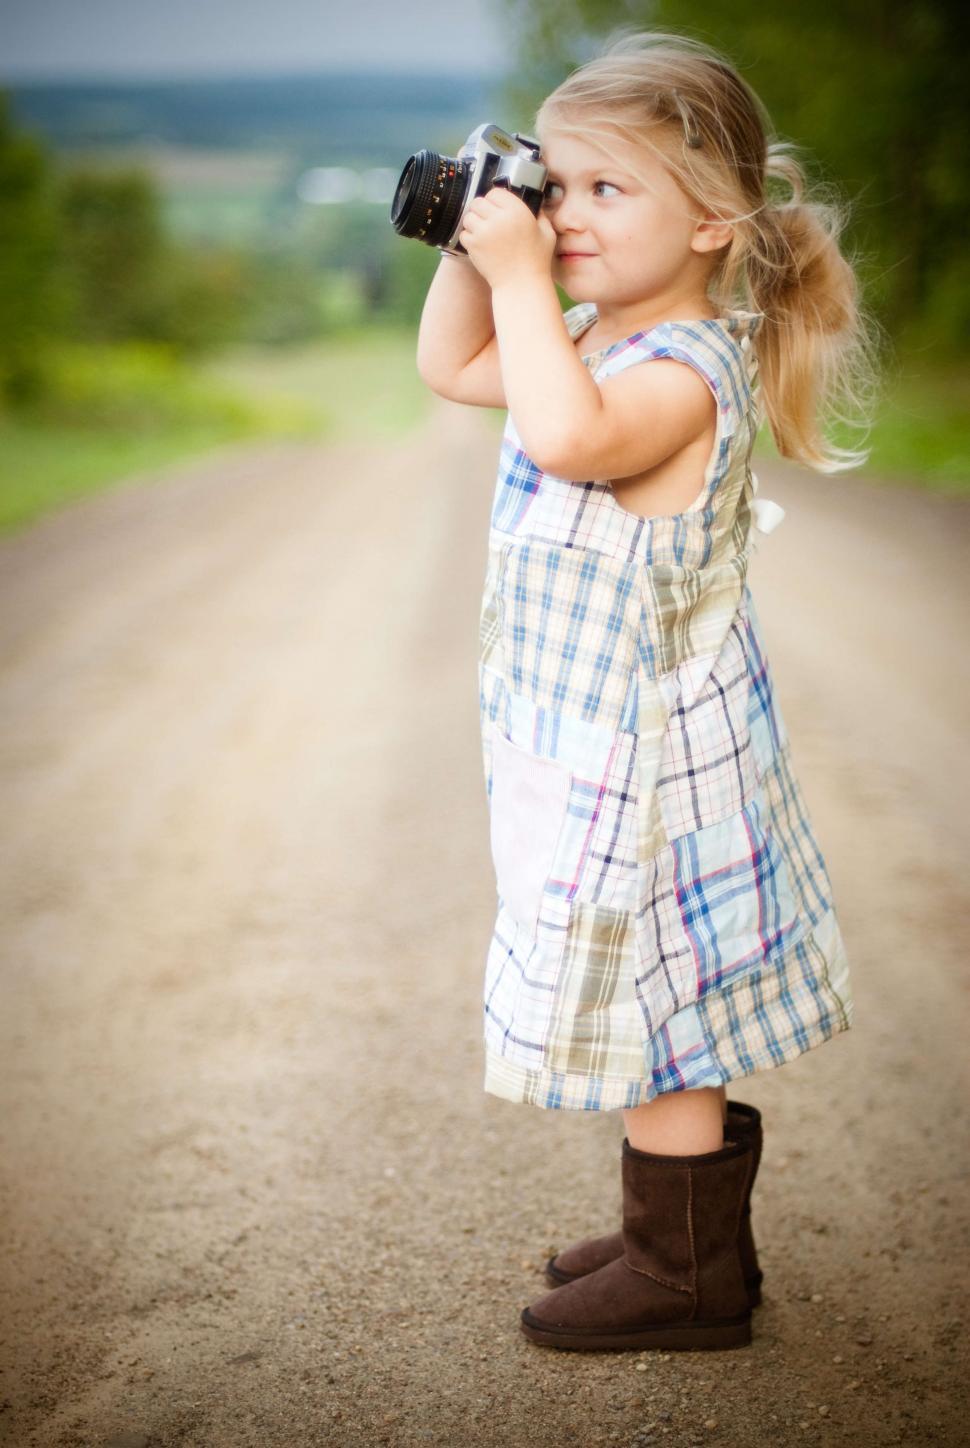 Free Image of Blonde girl child with camera  